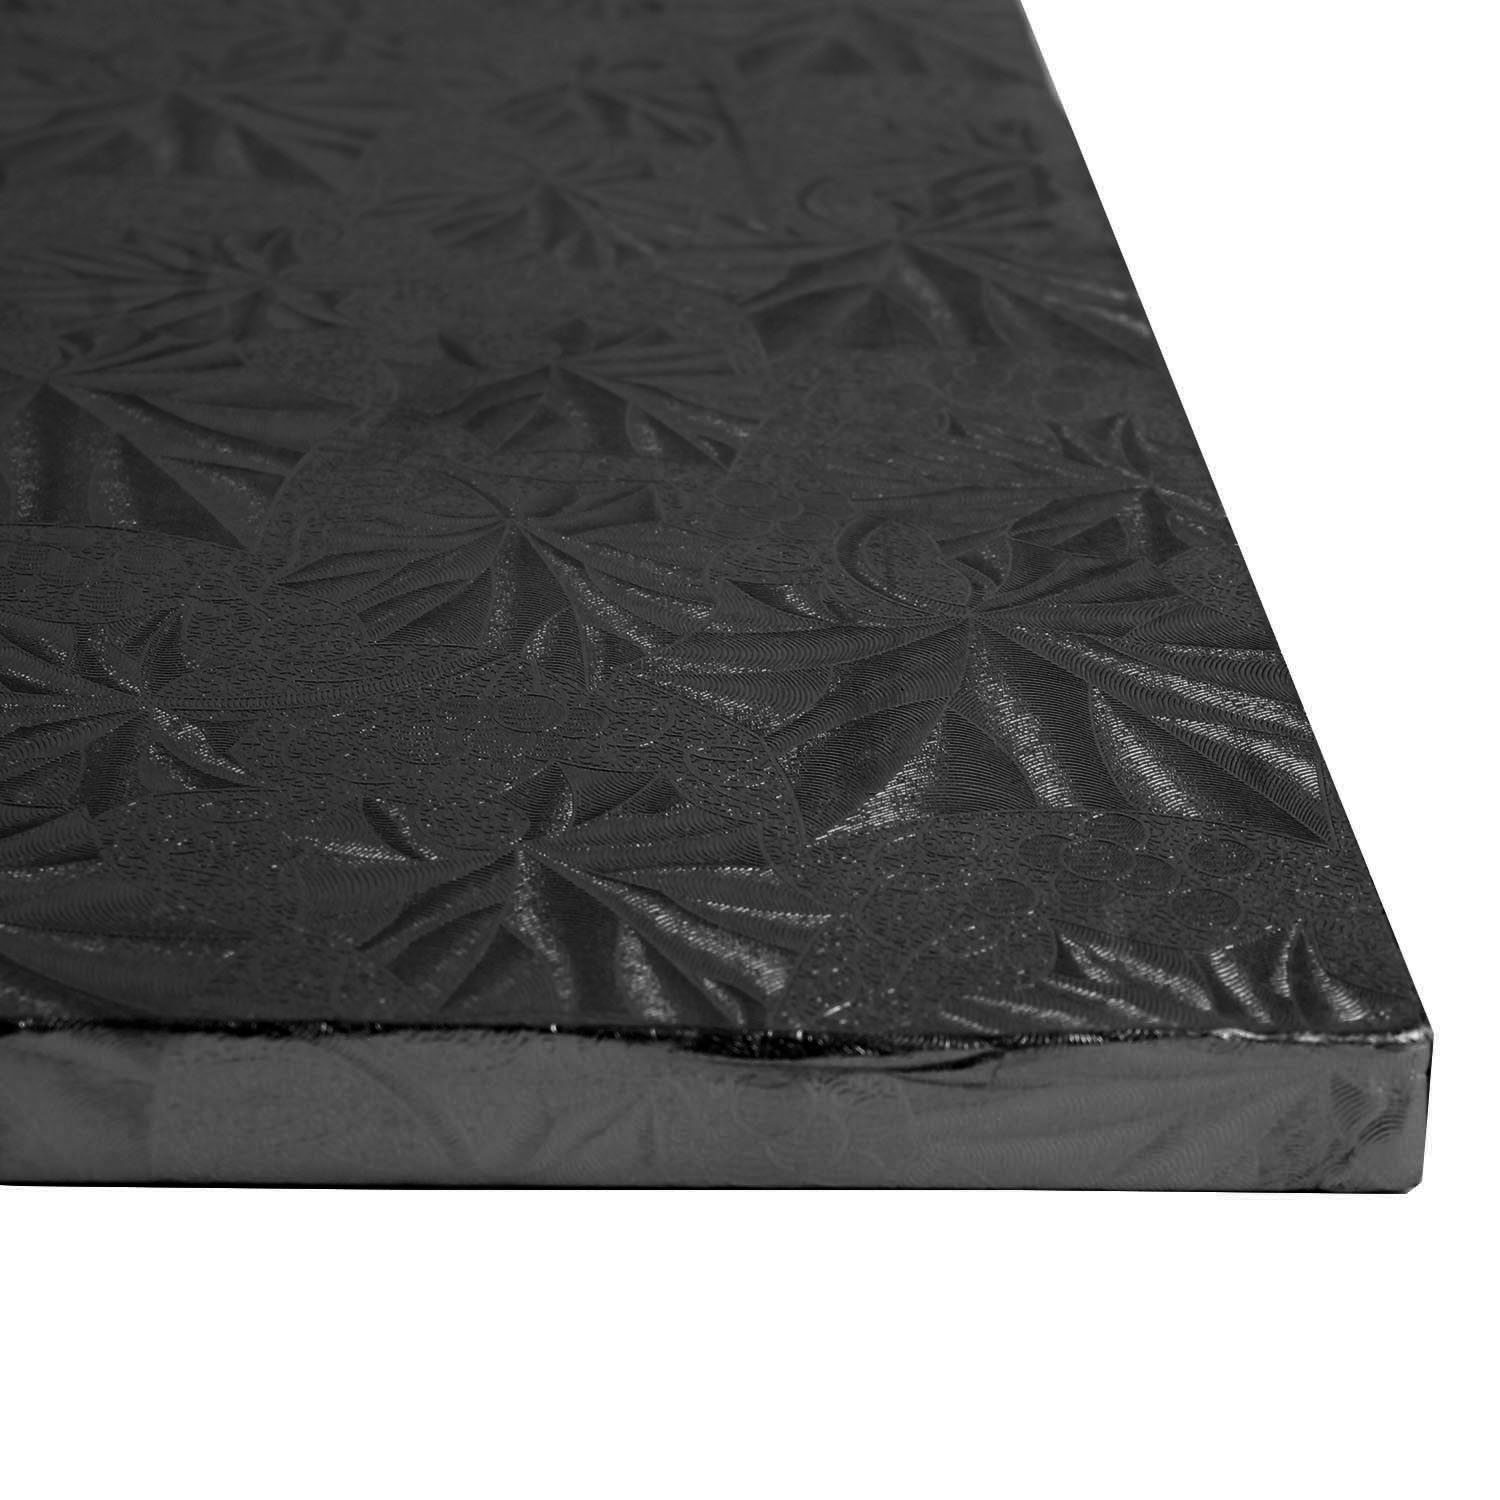 Square Black Foil Cake Drum Board, 16" x 1/2" Thick - Pack of 6 image 1